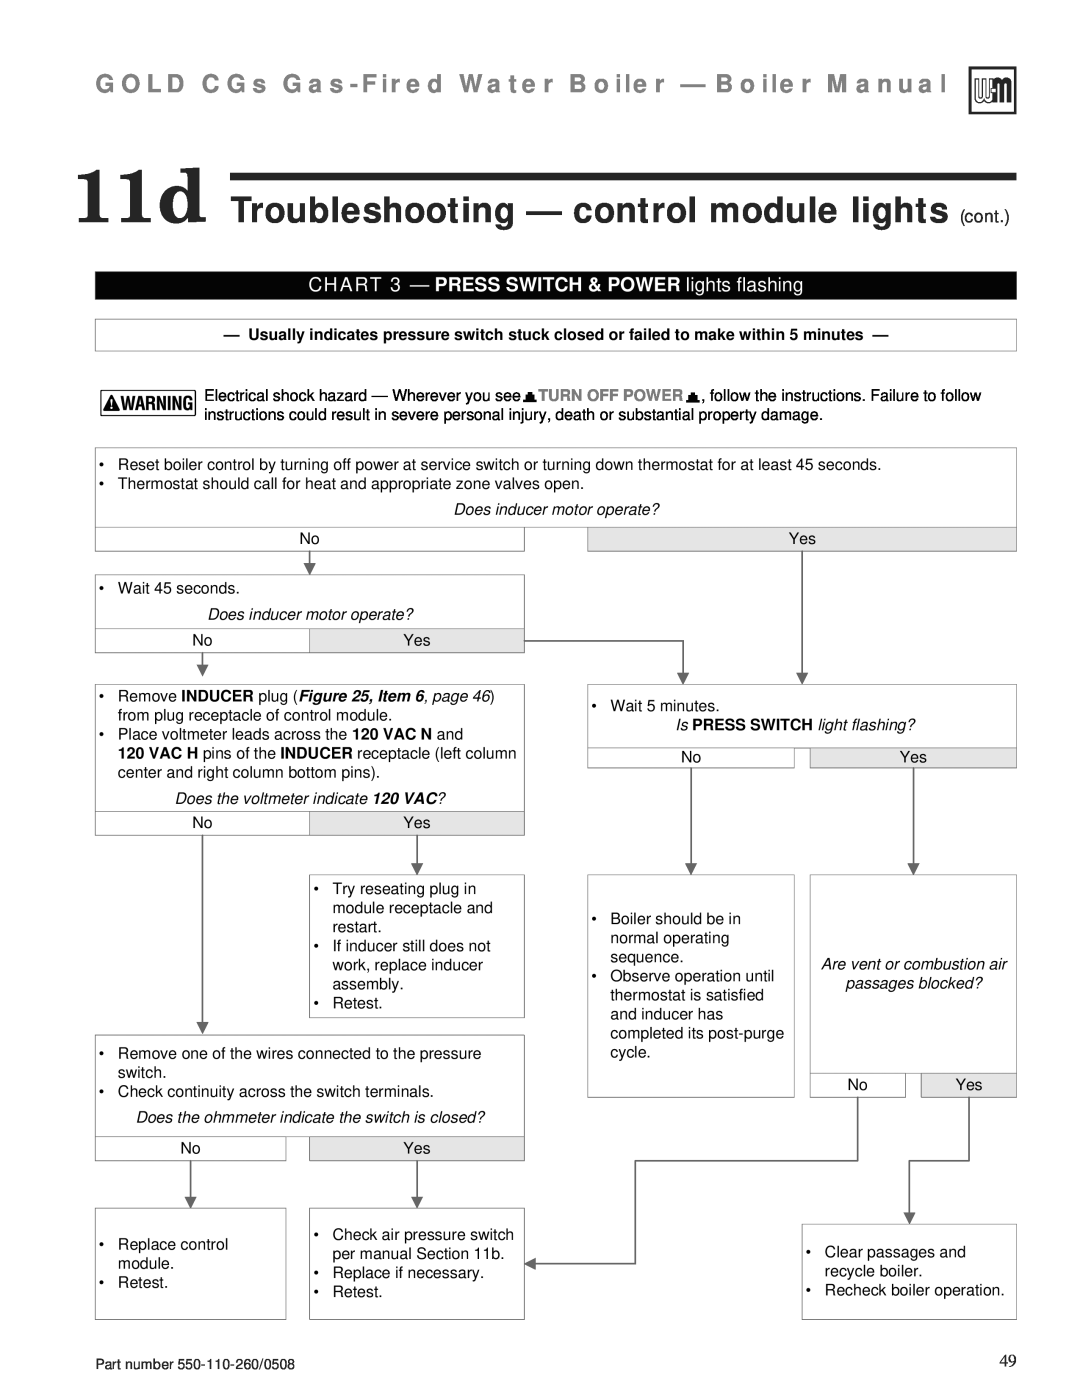 Weil-McLain 550-110-260/0508 manual 11d Troubleshooting — control module lights cont, Does inducer motor operate? 